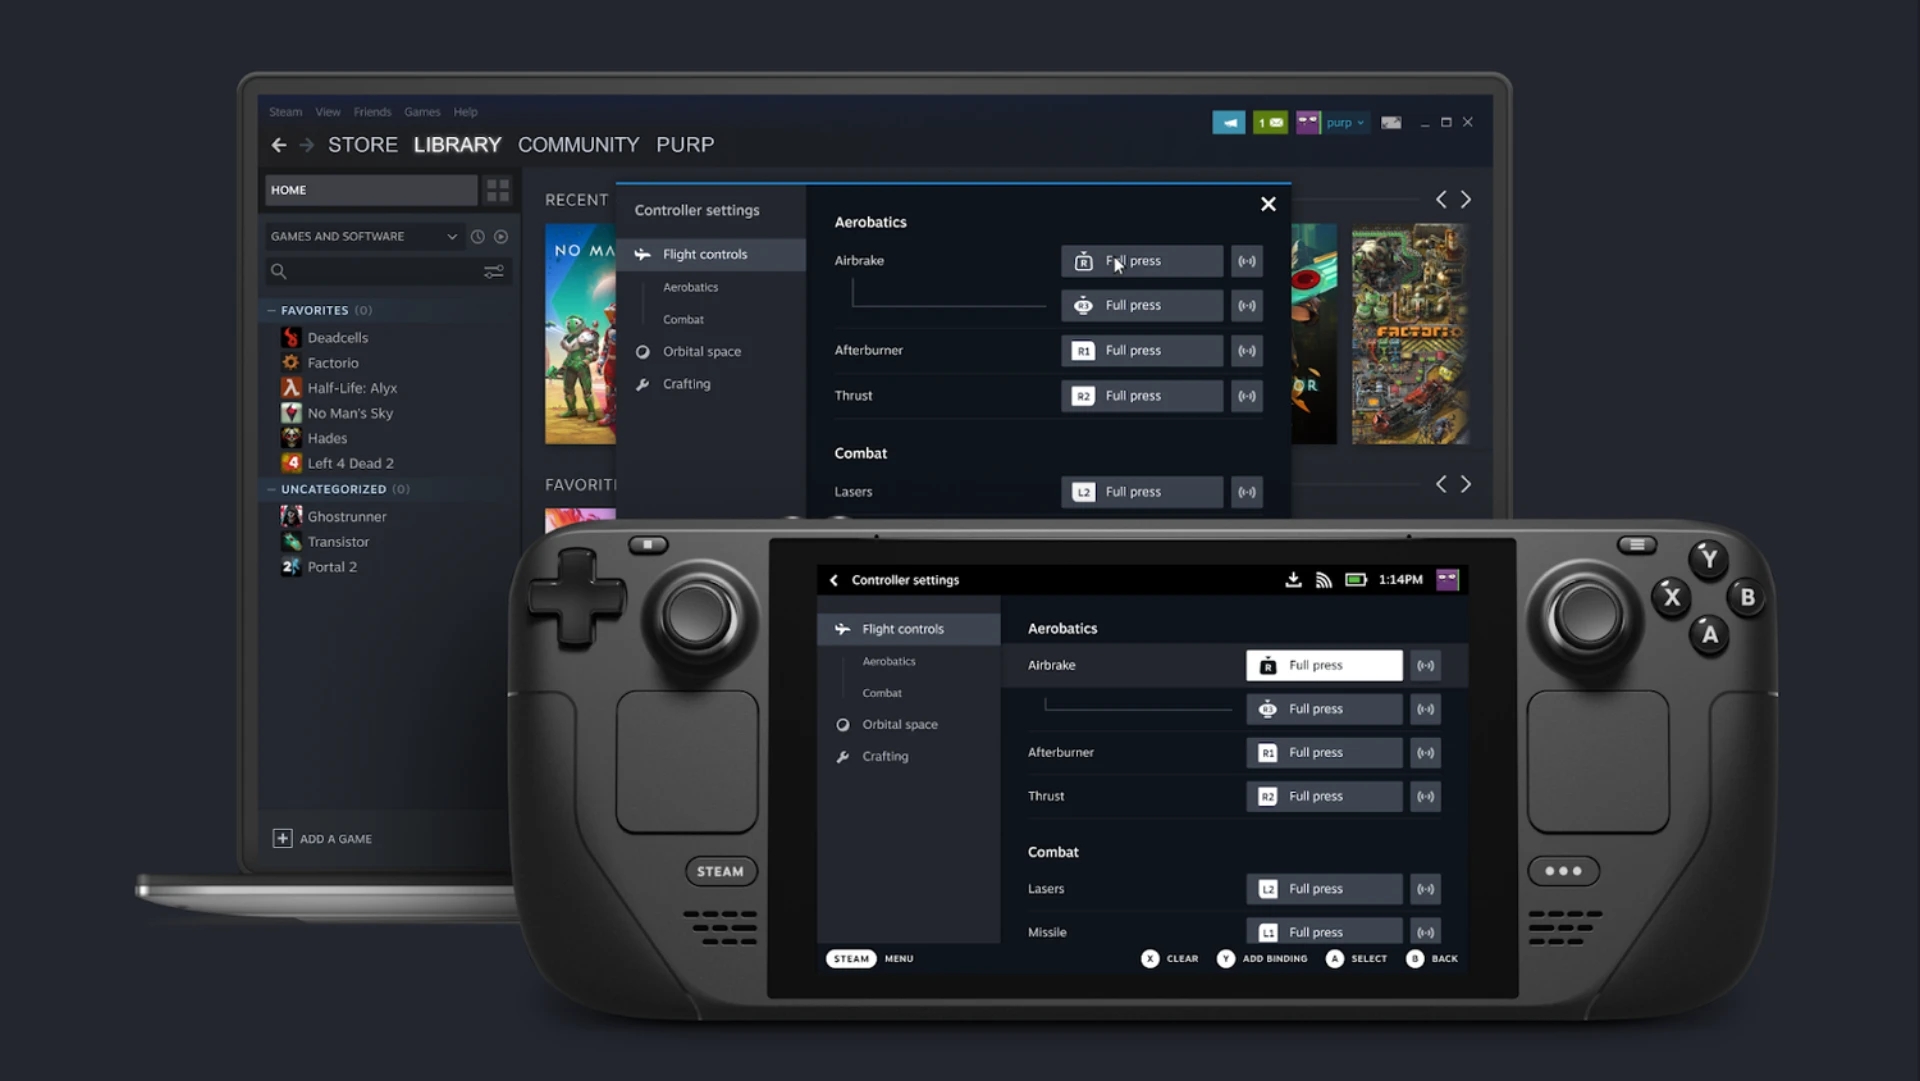 image of steam deck handheld gaming device with ui showing